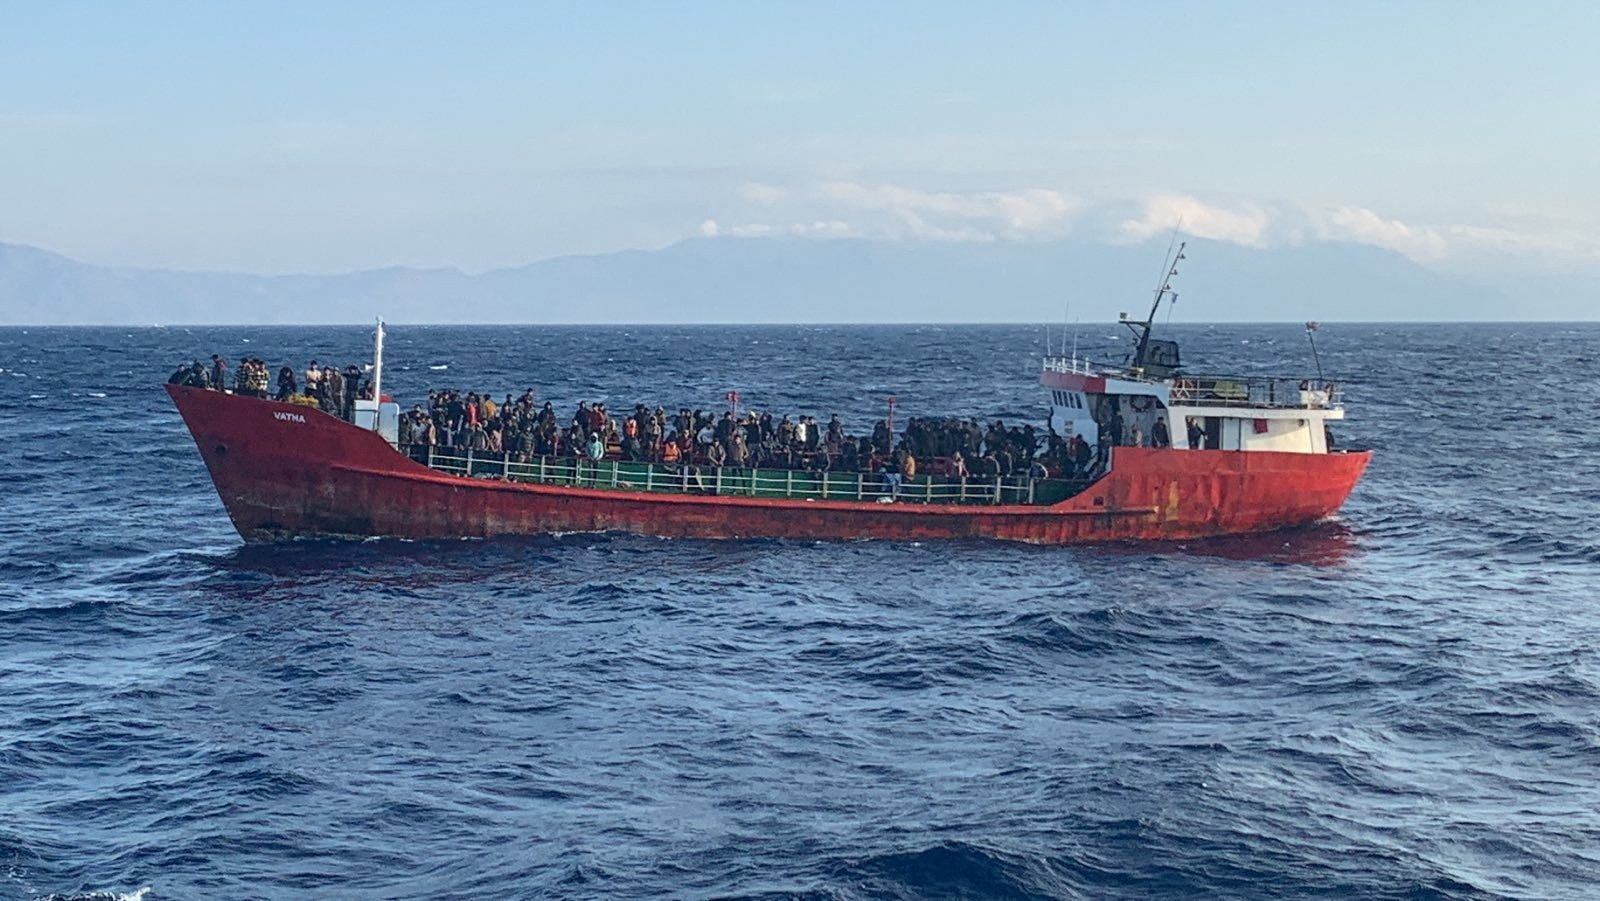 Cargo ship carries migrants during a rescue operation, as it sails off the island of Crete